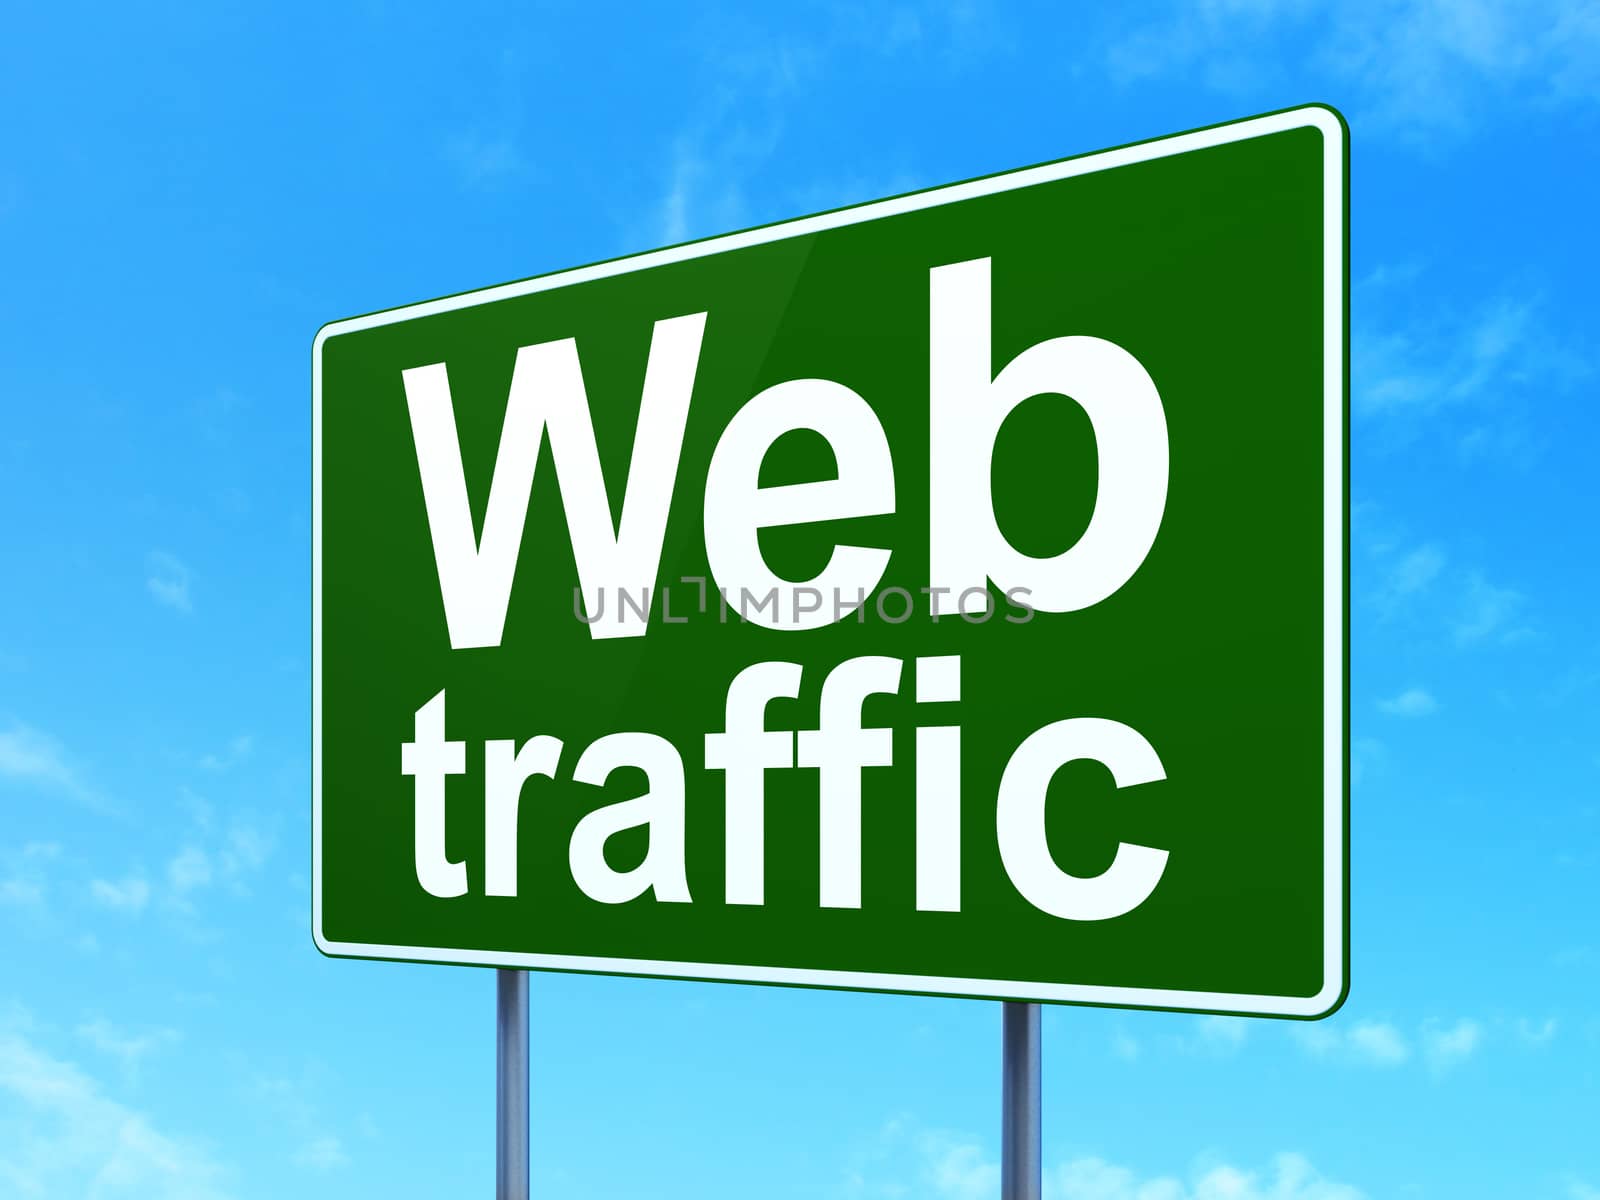 Web design concept: Web Traffic on green road highway sign, clear blue sky background, 3D rendering